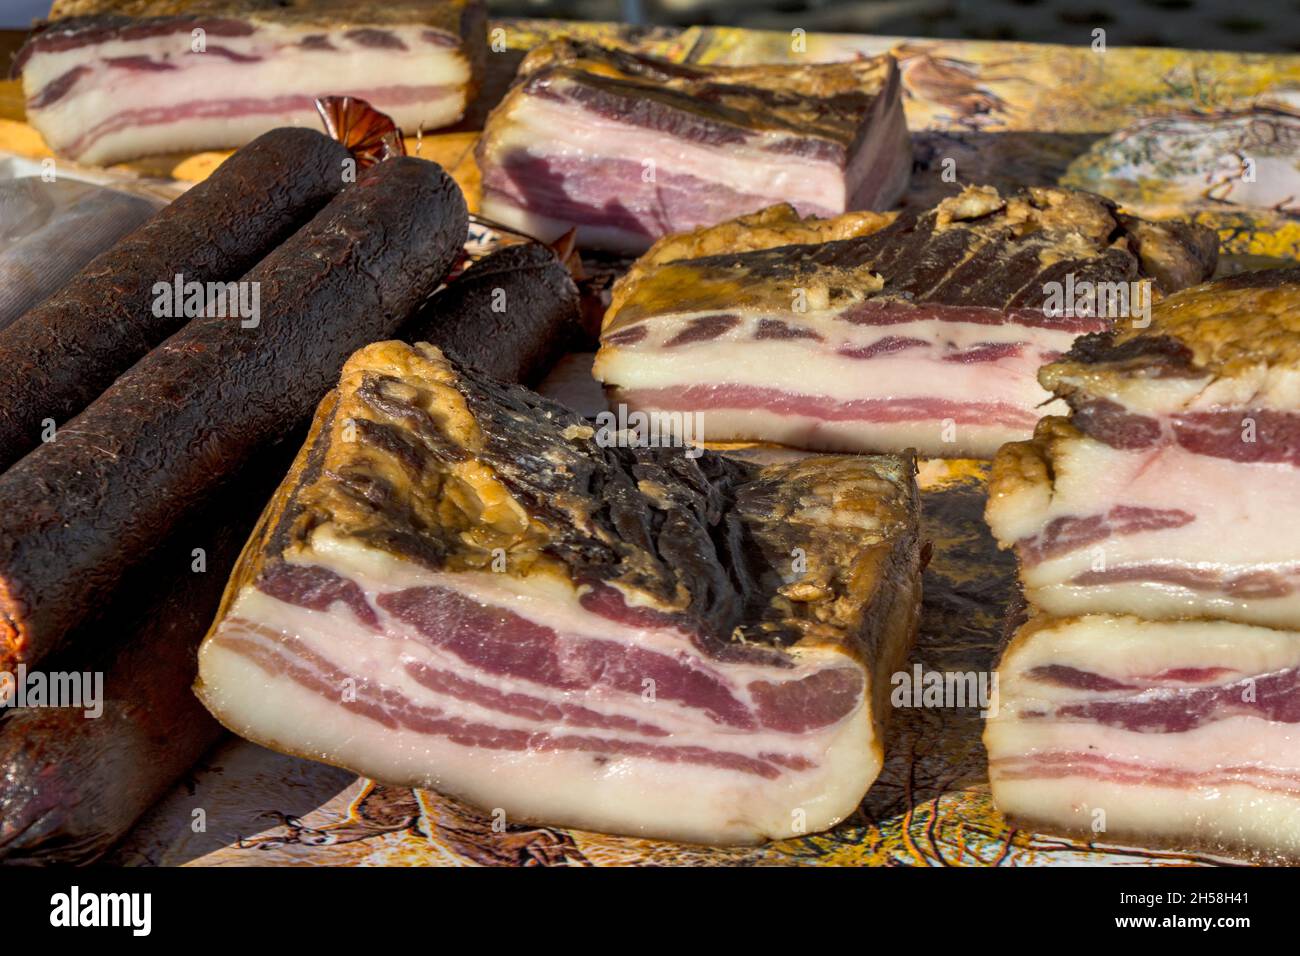 Exposed bacon and dried meat products. The products are domestic and are presented for sale. Stock Photo